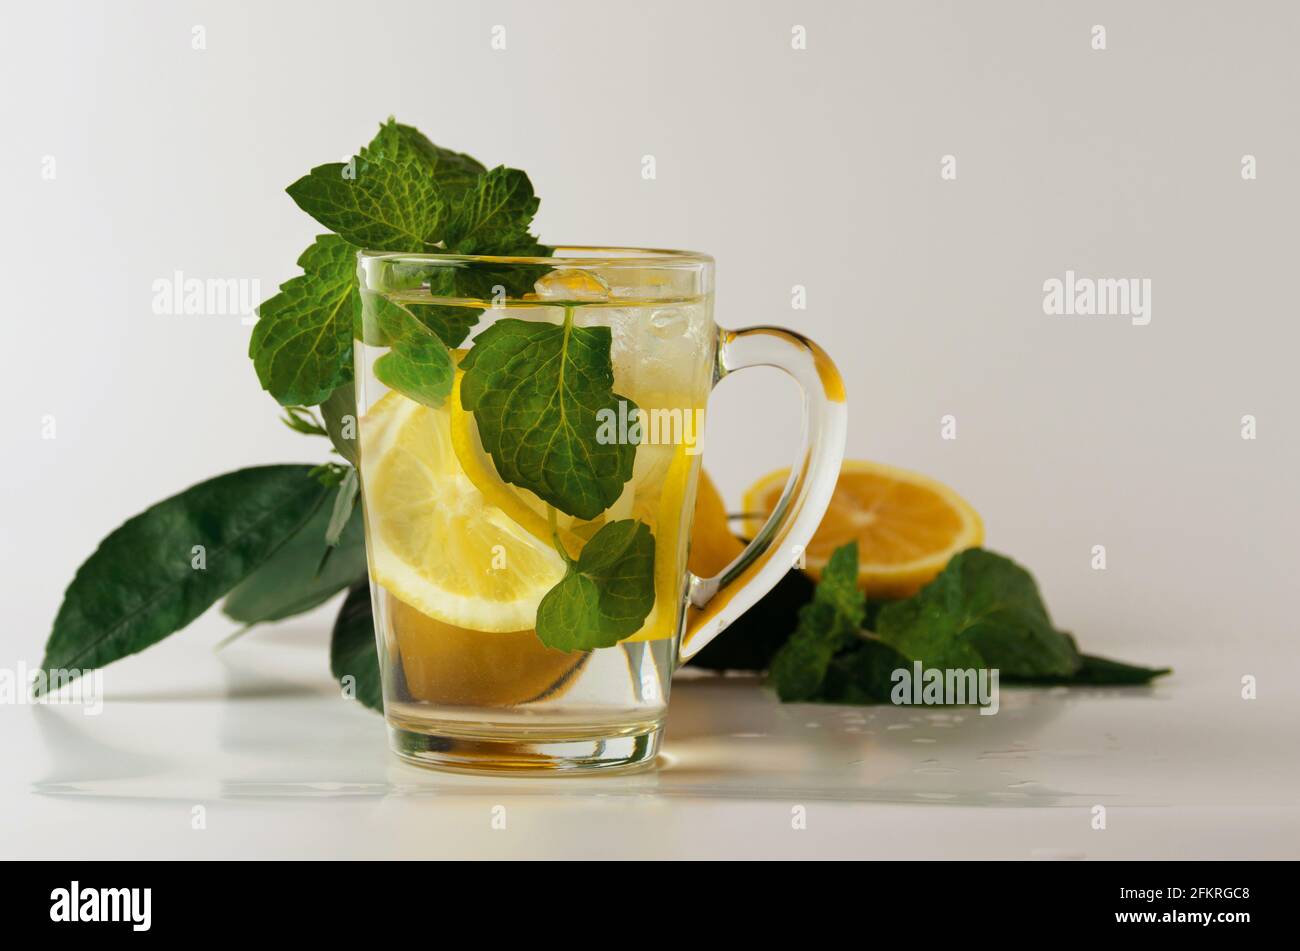 https://c8.alamy.com/comp/2FKRGC8/refreshing-lemonade-a-glass-glass-of-water-with-lemon-slices-mint-leaves-and-ice-cubes-non-alcoholic-chilled-drink-selective-focus-2FKRGC8.jpg